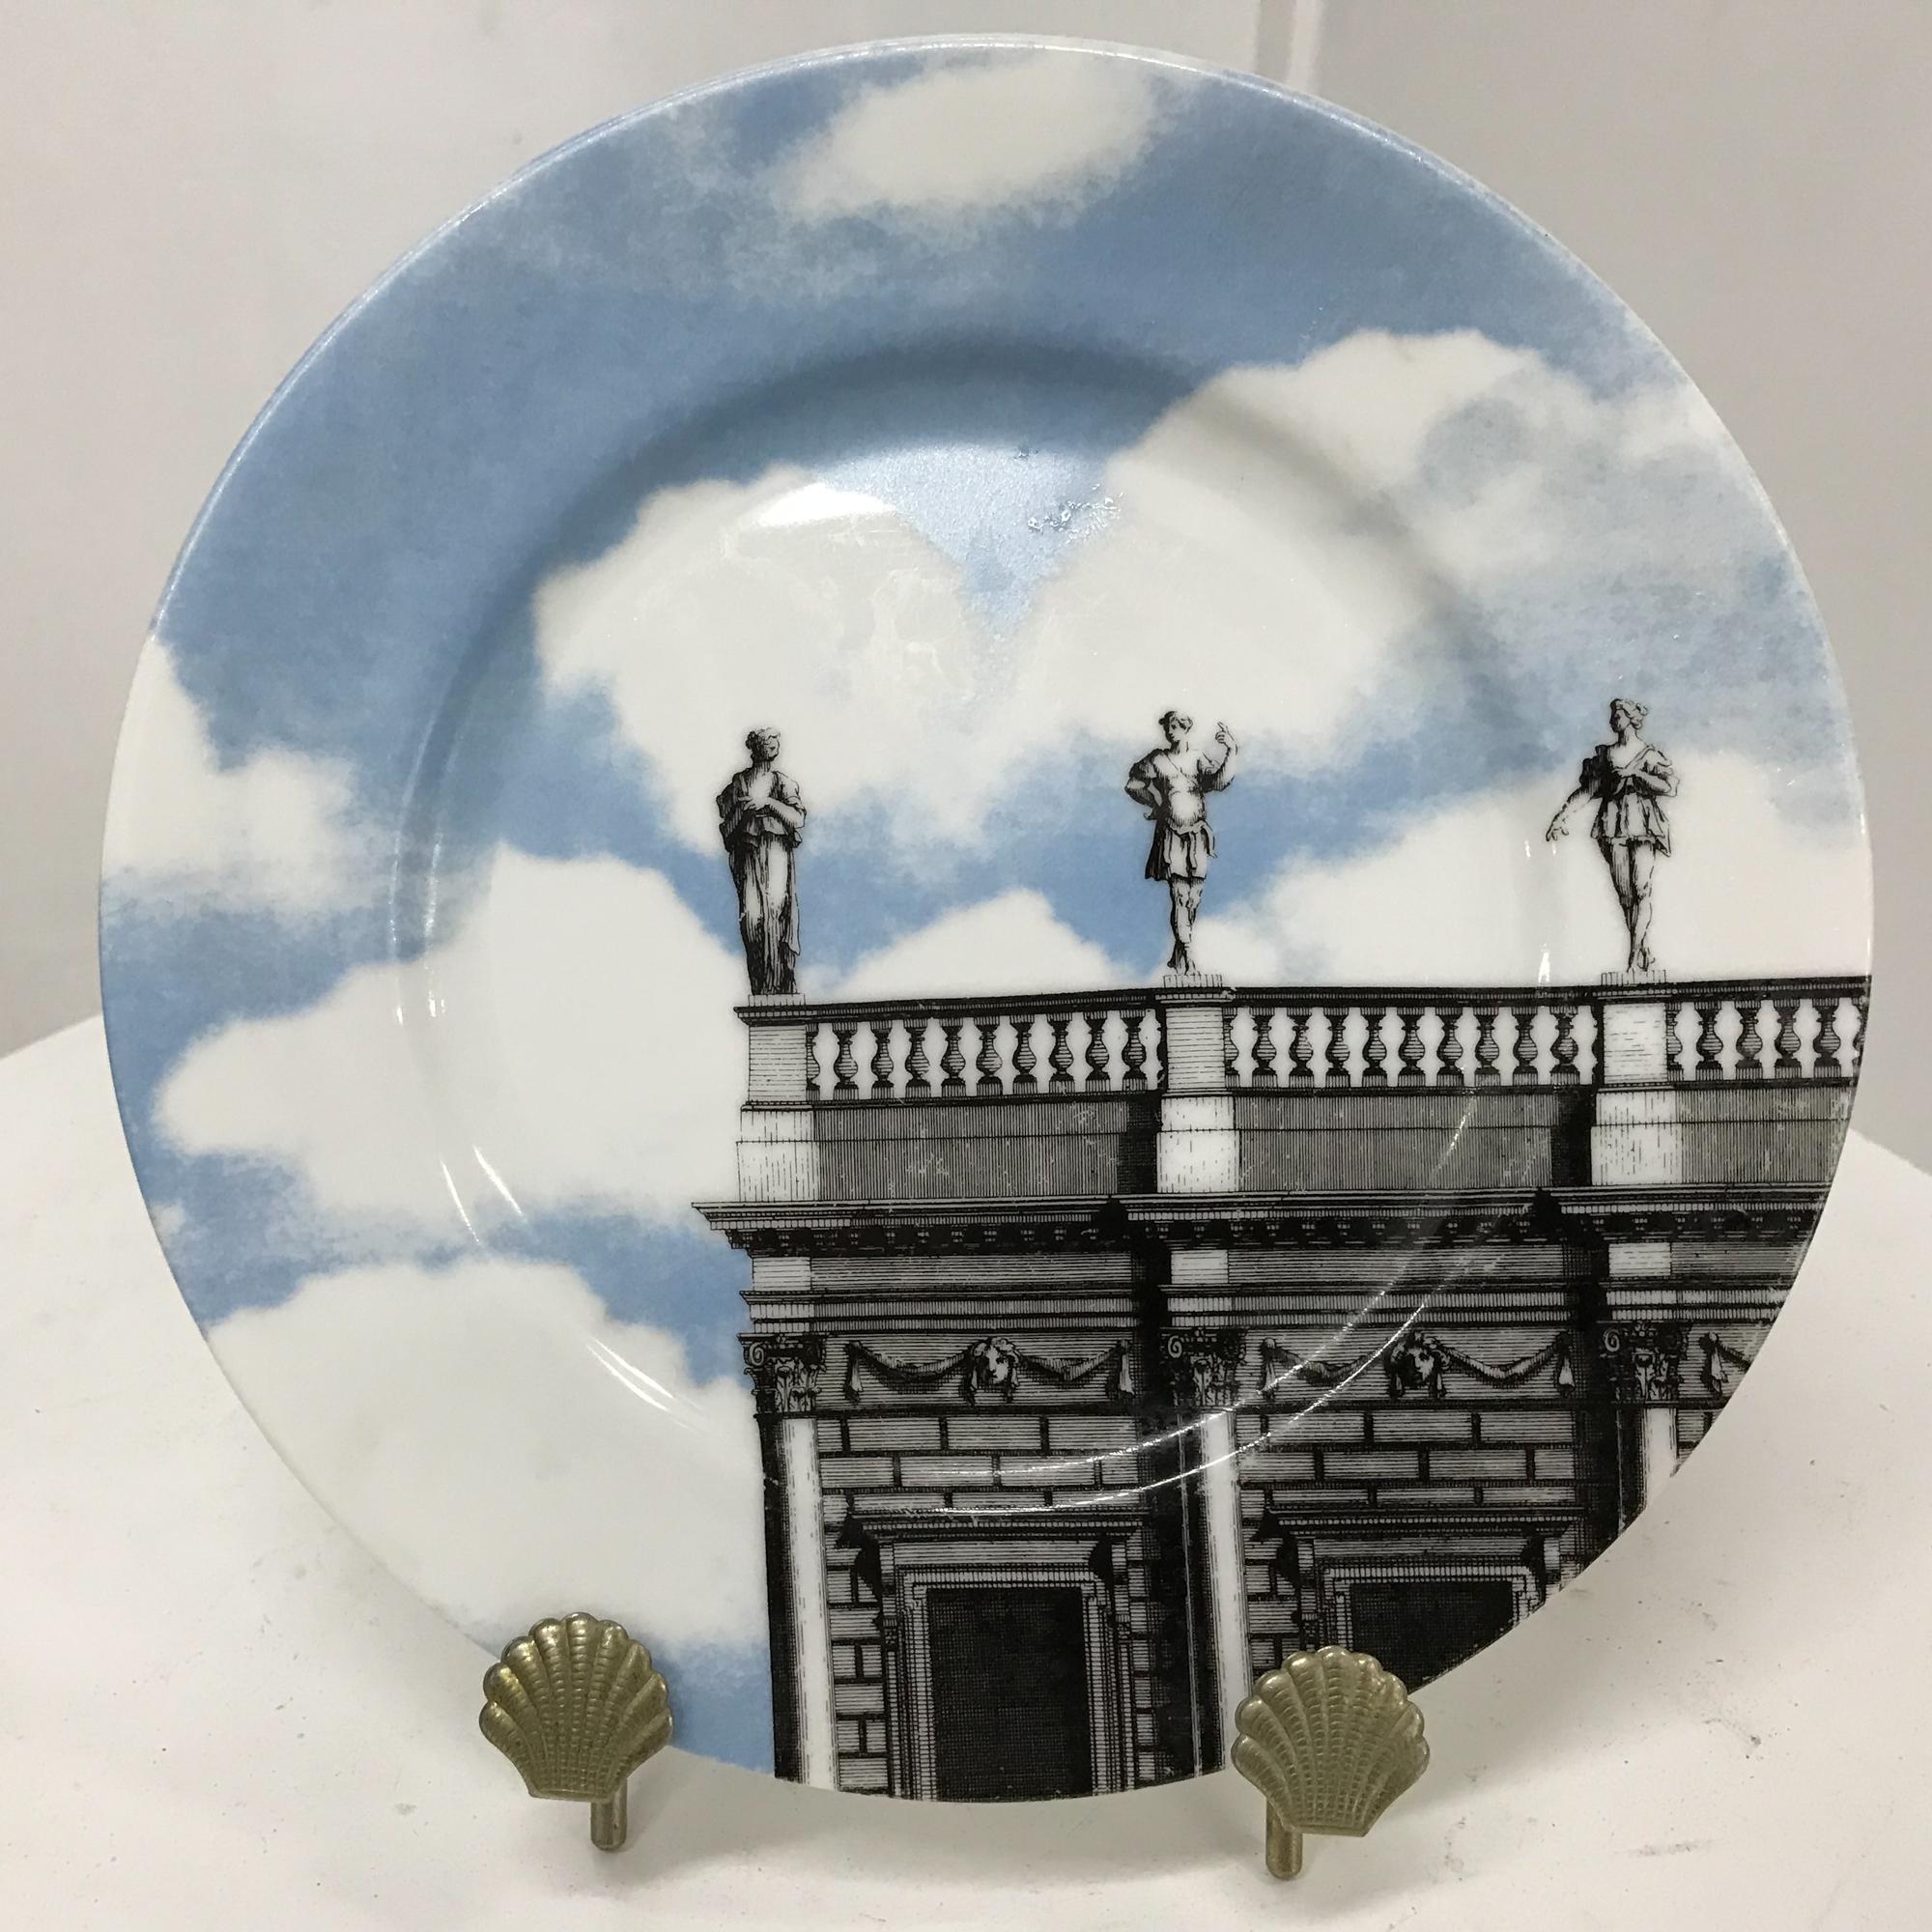 Set of three Fitz & Floyd Fine Porcelain Renaissance Vistas II Collectible decorative plates.
Labeled as Japan from Fitz and Floyd of Dallas USA.
Measures: 8.5